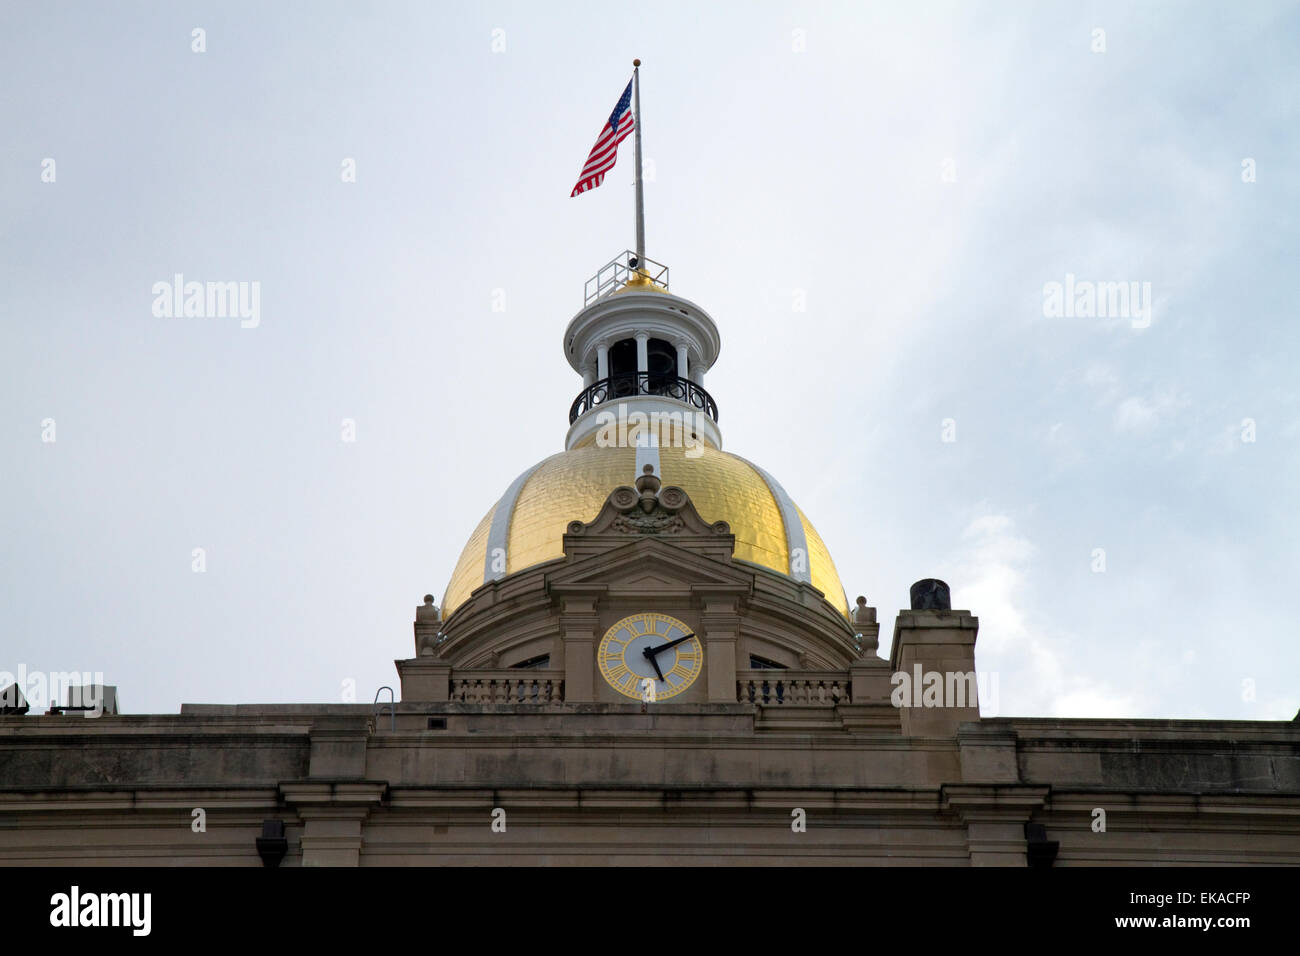 Gold dome and clock atop the City Hall in Savannah, Georgia, USA. Stock Photo